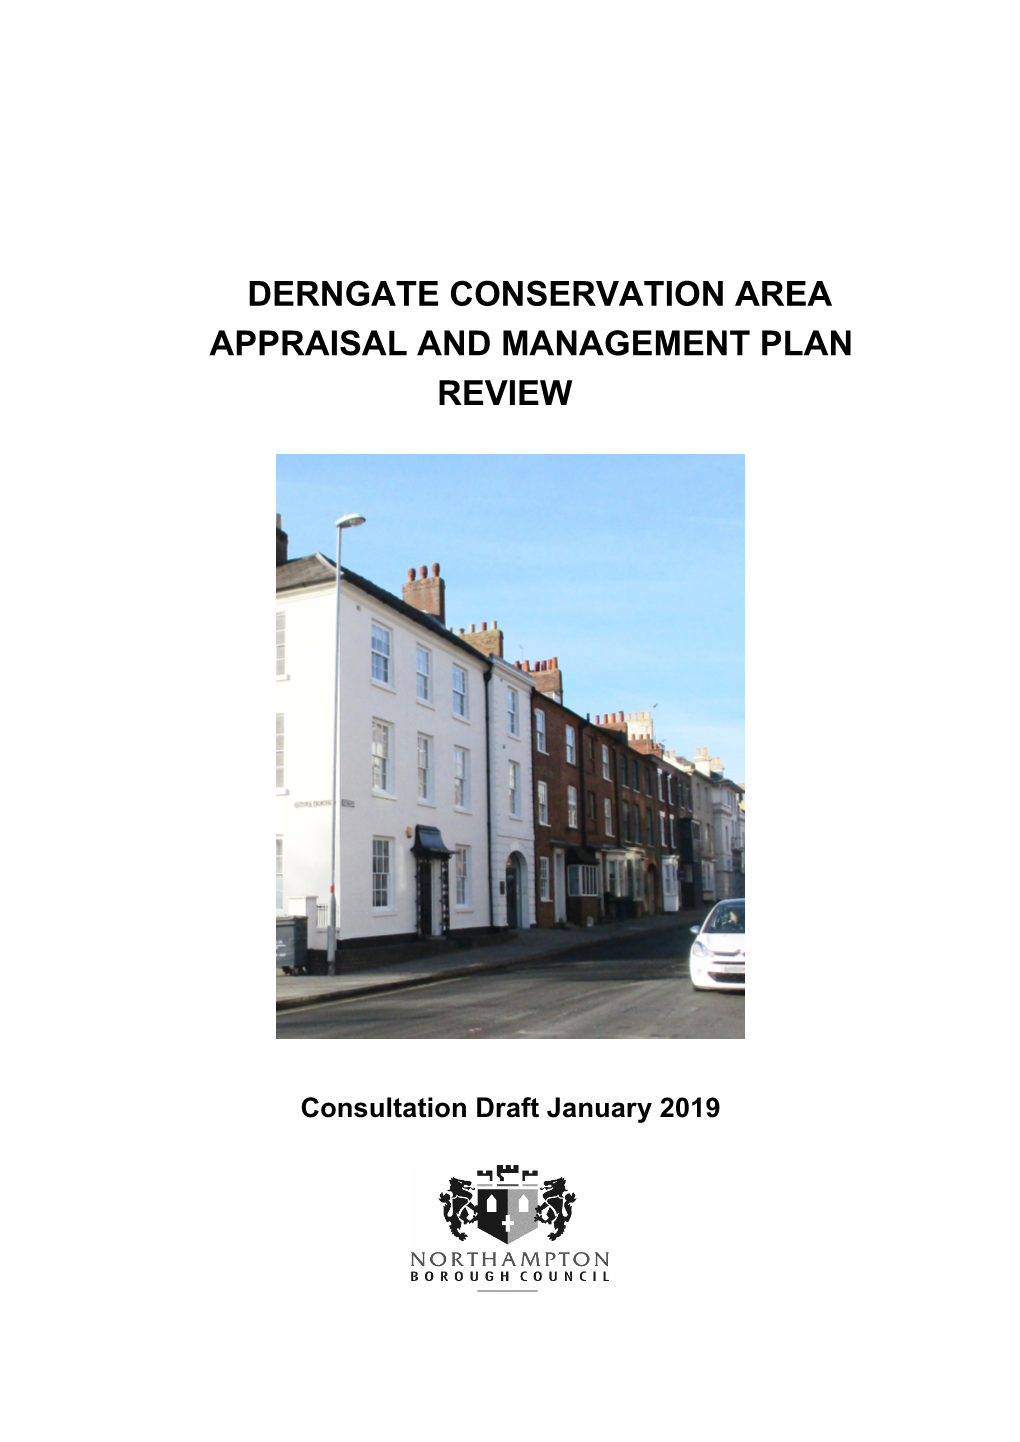 Derngate Conservation Area Appraisal and Management Plan Review